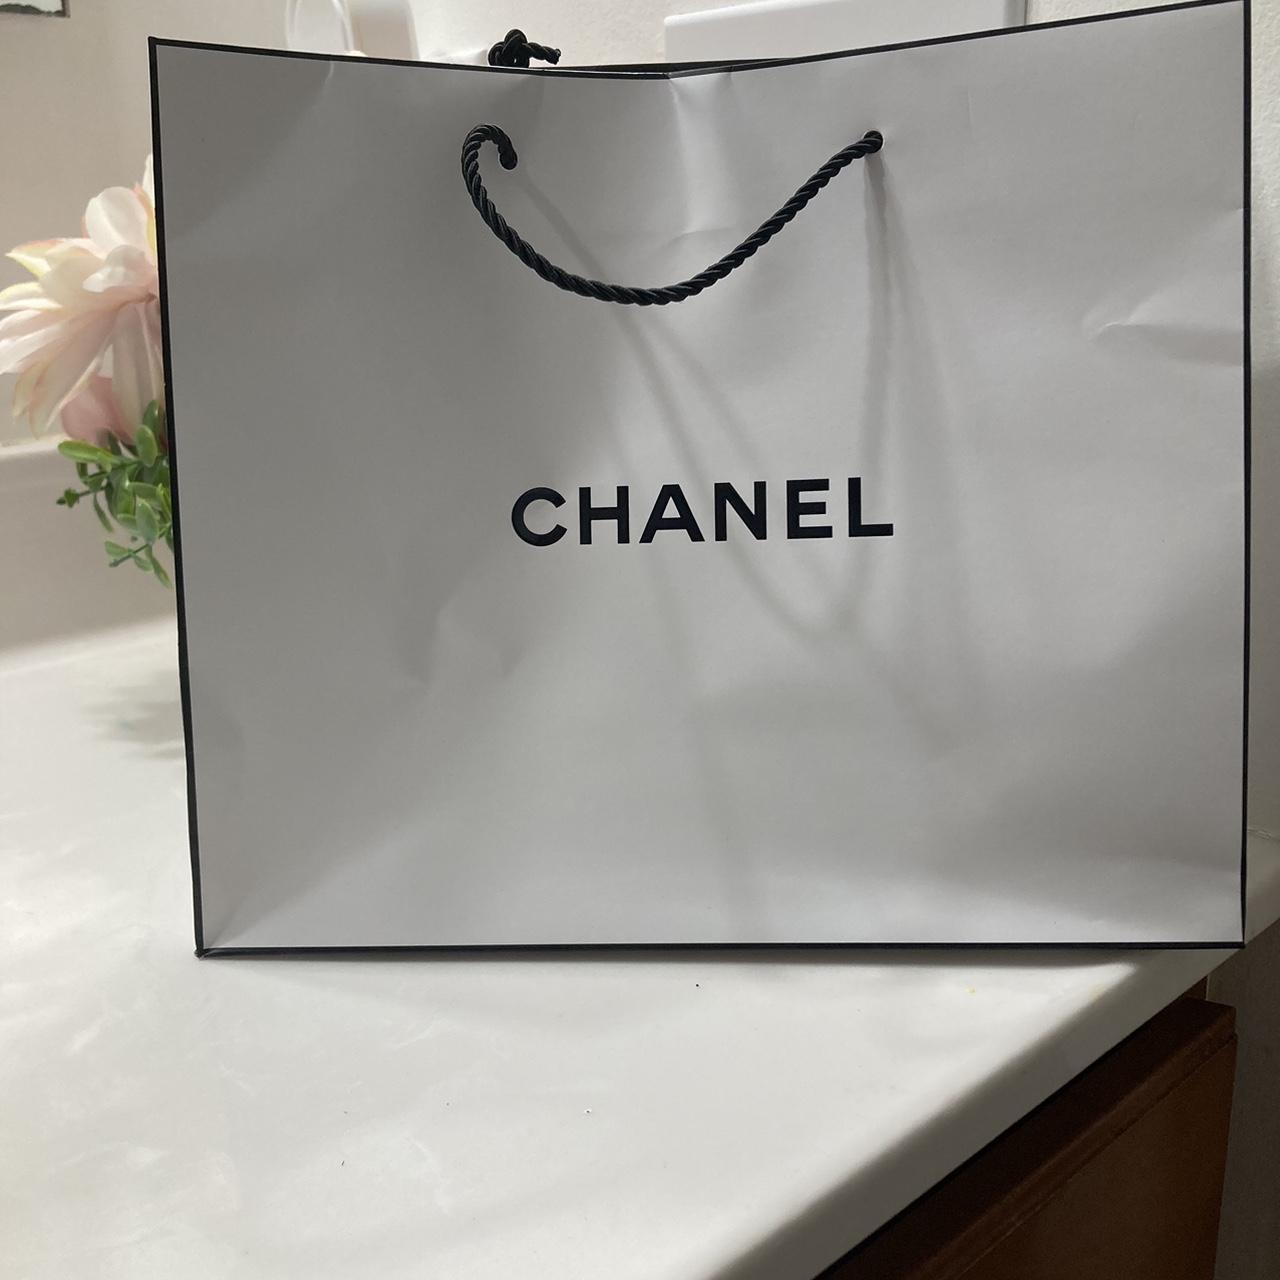 Chanel Paper Bag Black and White | 3D Model Collection